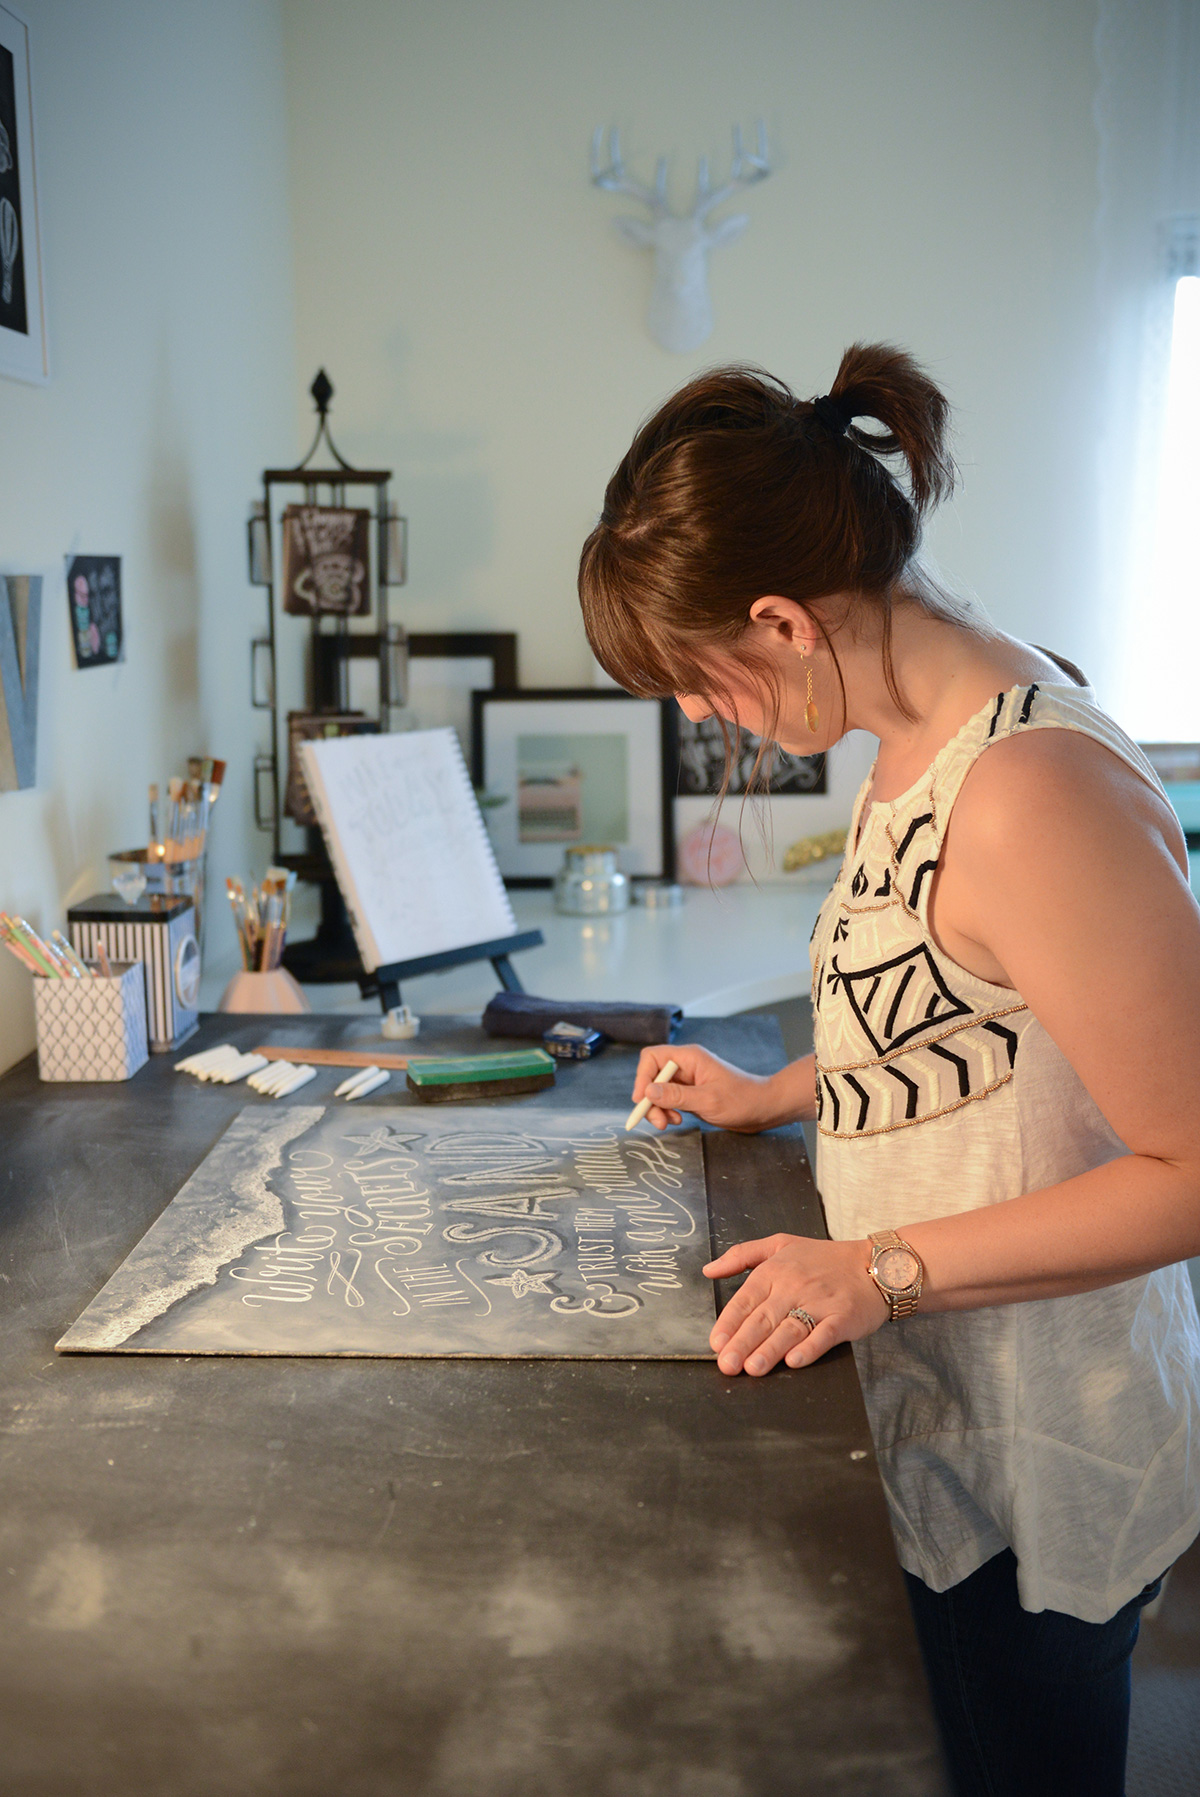 Valerie McKeehan, author of The Complete Book of Chalk Lettering, drawing in her studio